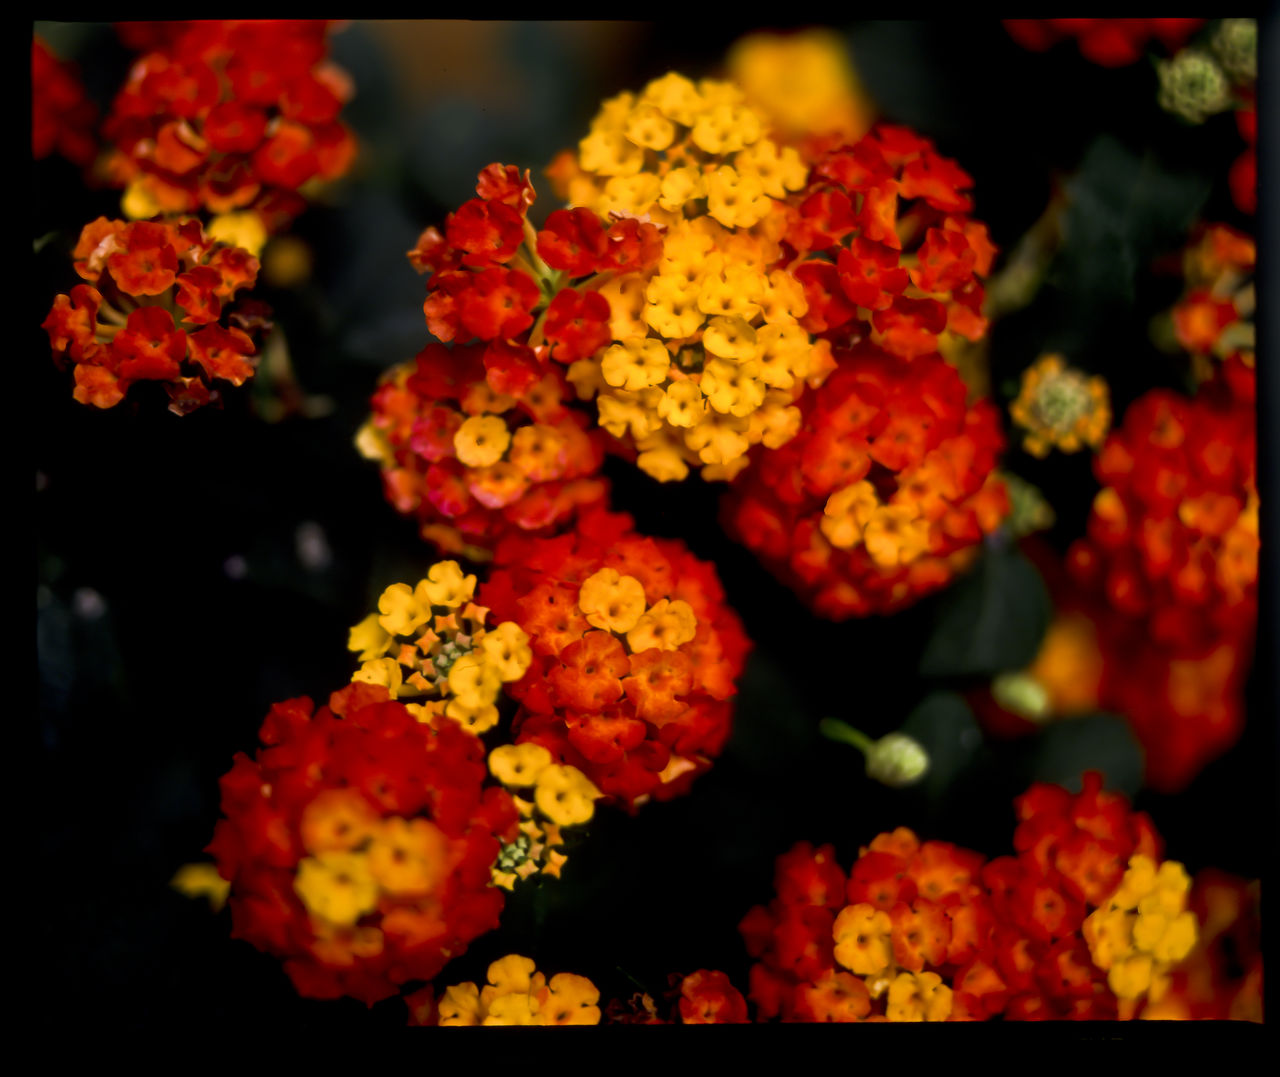 CLOSE-UP OF MARIGOLD FLOWERS ON BOUQUET